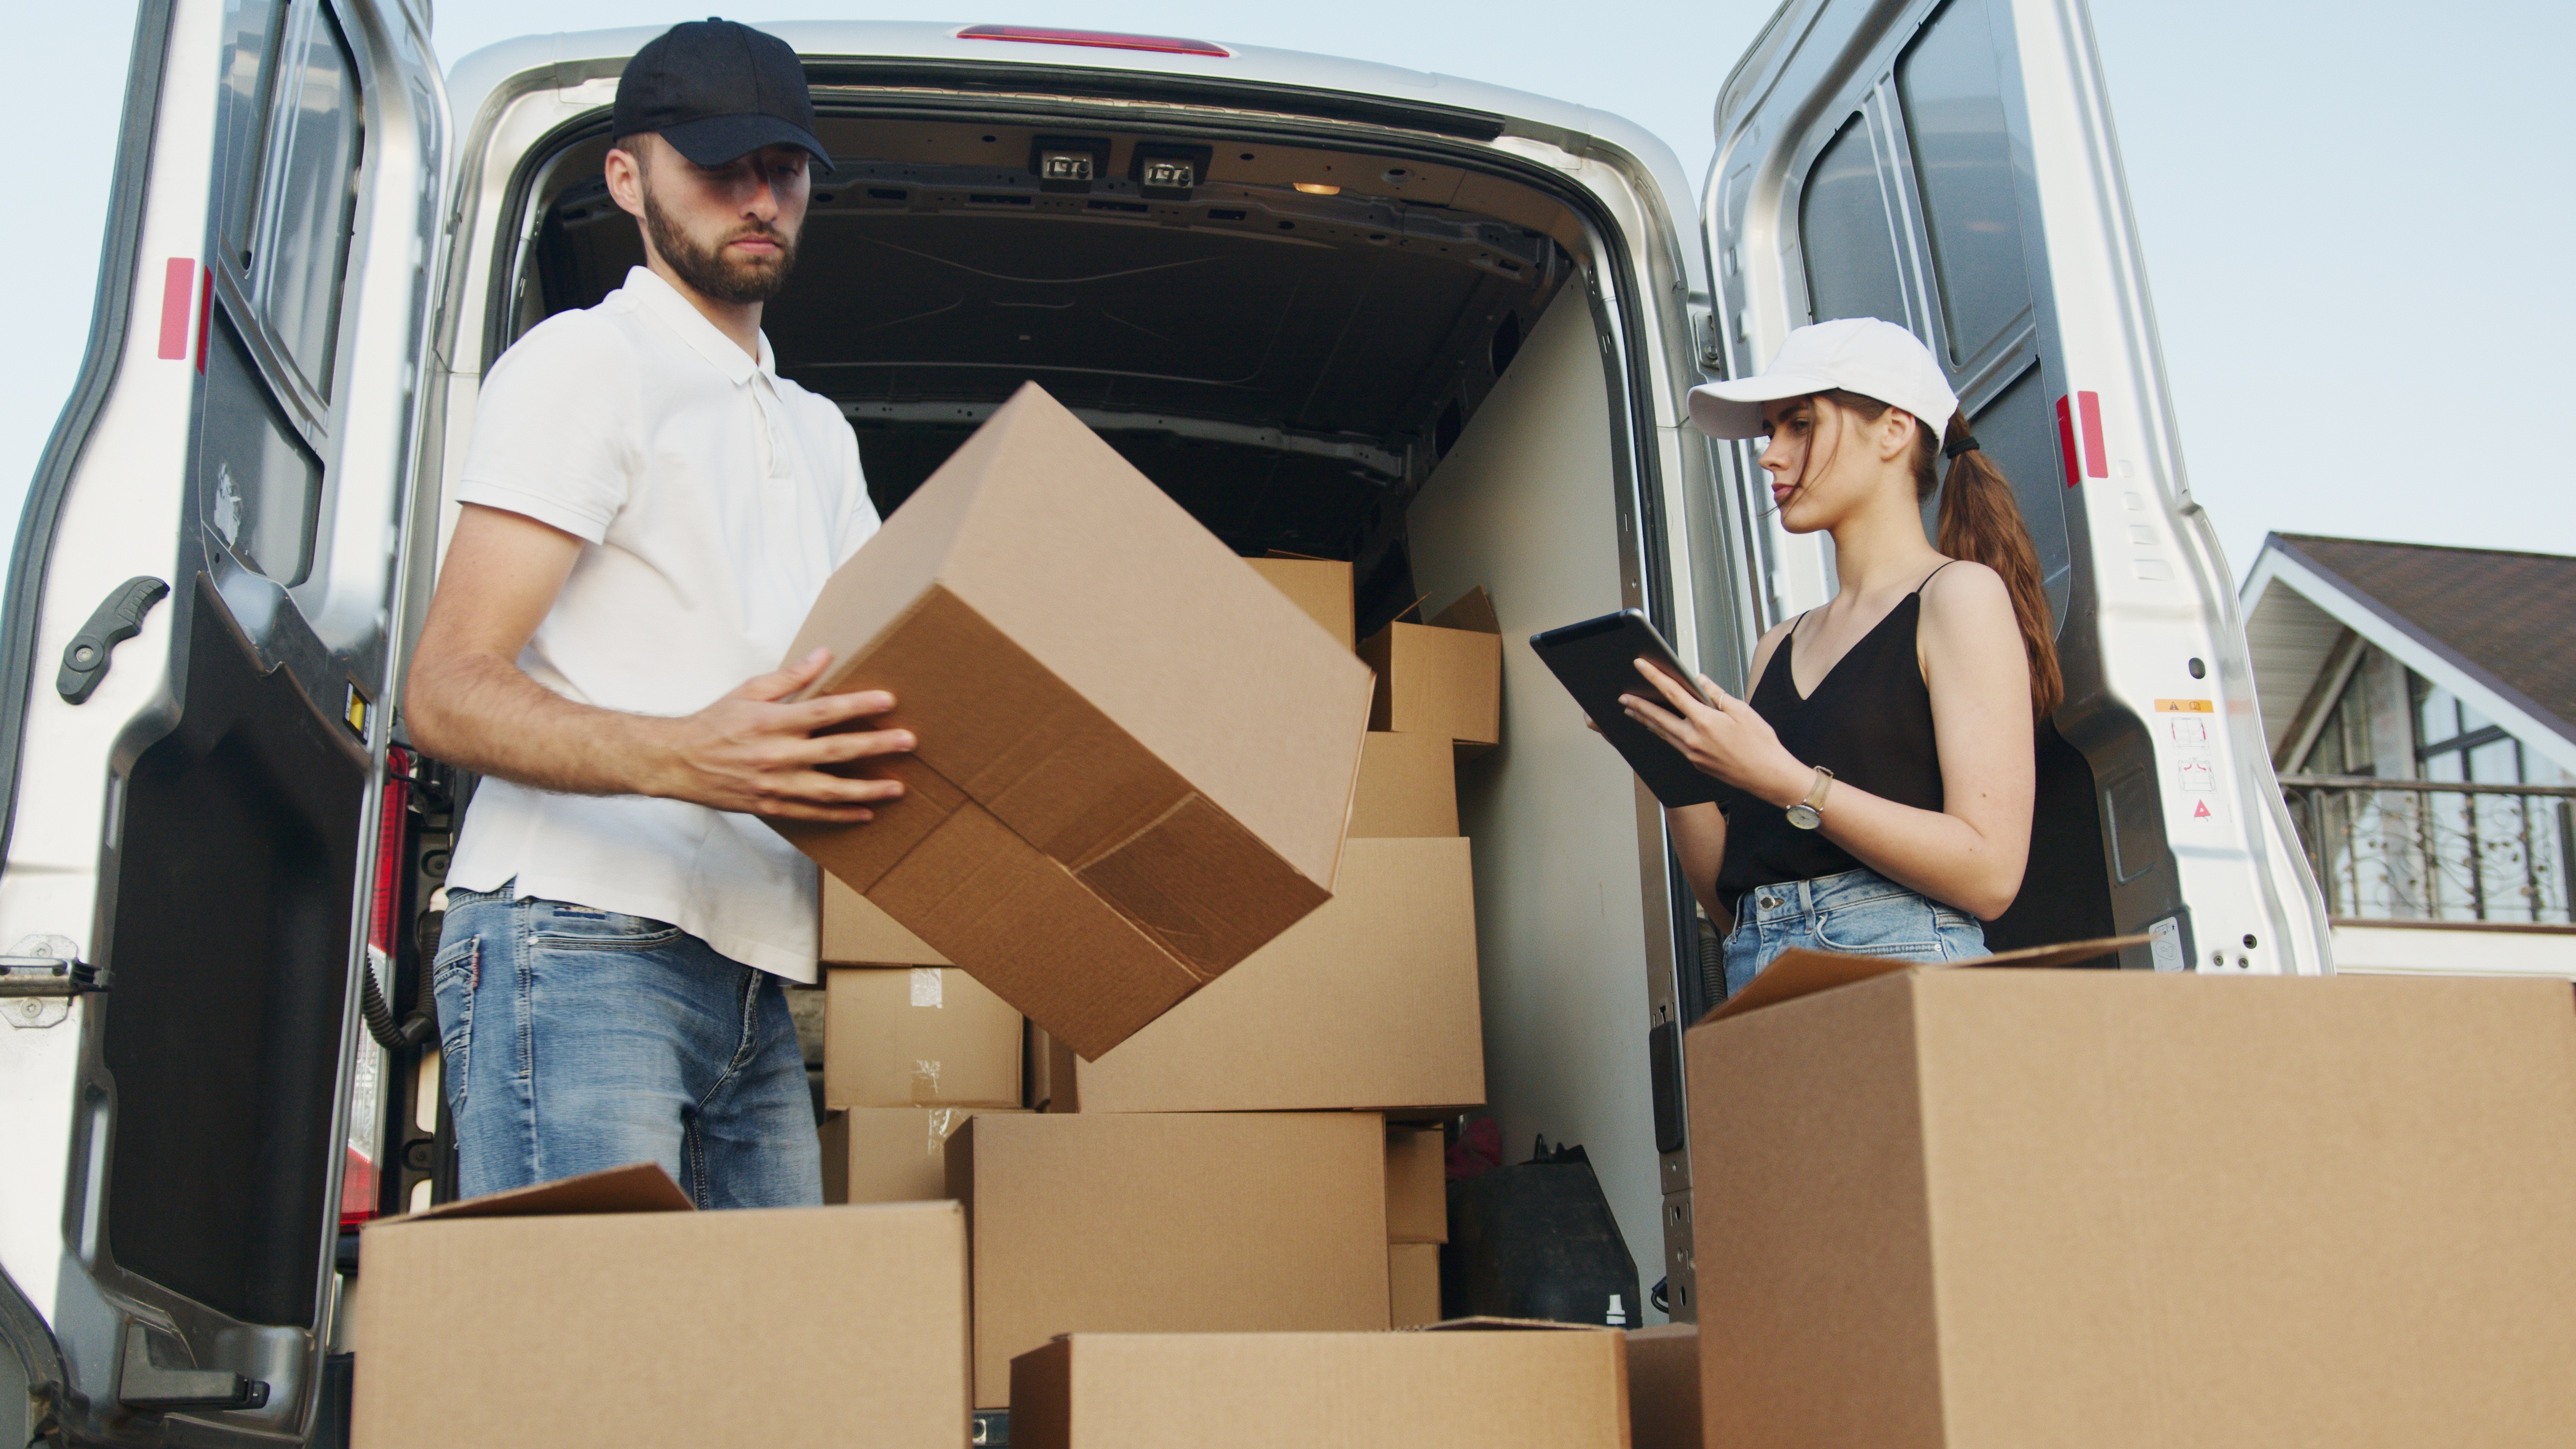 Manhattan Movers - Chelsea Movers, NYC Movers, Storage, Boxes - How to Pick a Moving Company